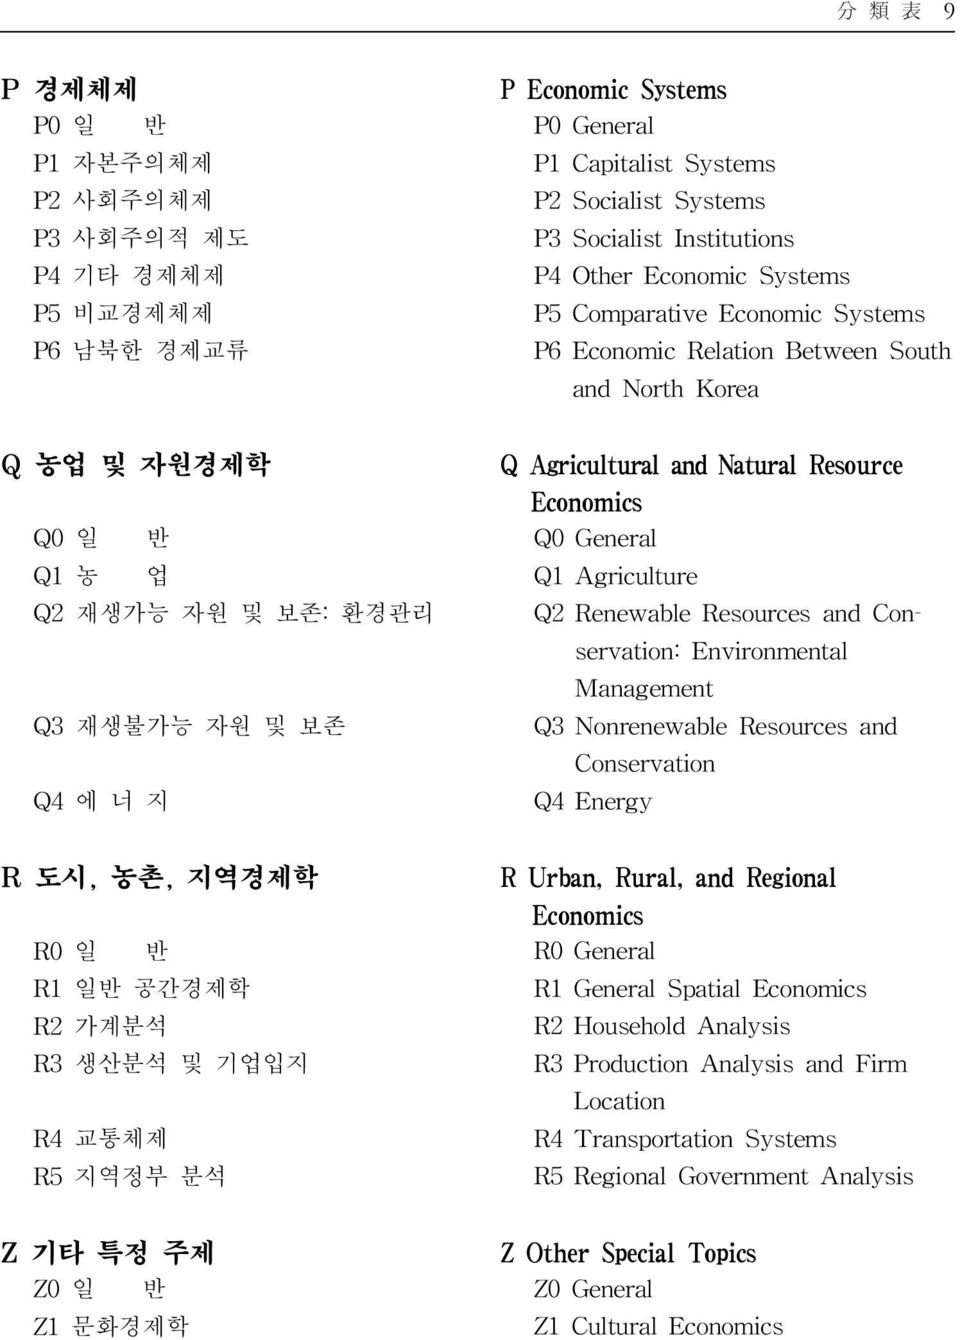 Natural Resource Economics Q0 General Q1 Agriculture Q2 Renewable Resources and Conservation: Environmental Management Q3 Nonrenewable Resources and Conservation Q4 Energy R 도시, 농촌, 지역경제학 R0 일 반 R1